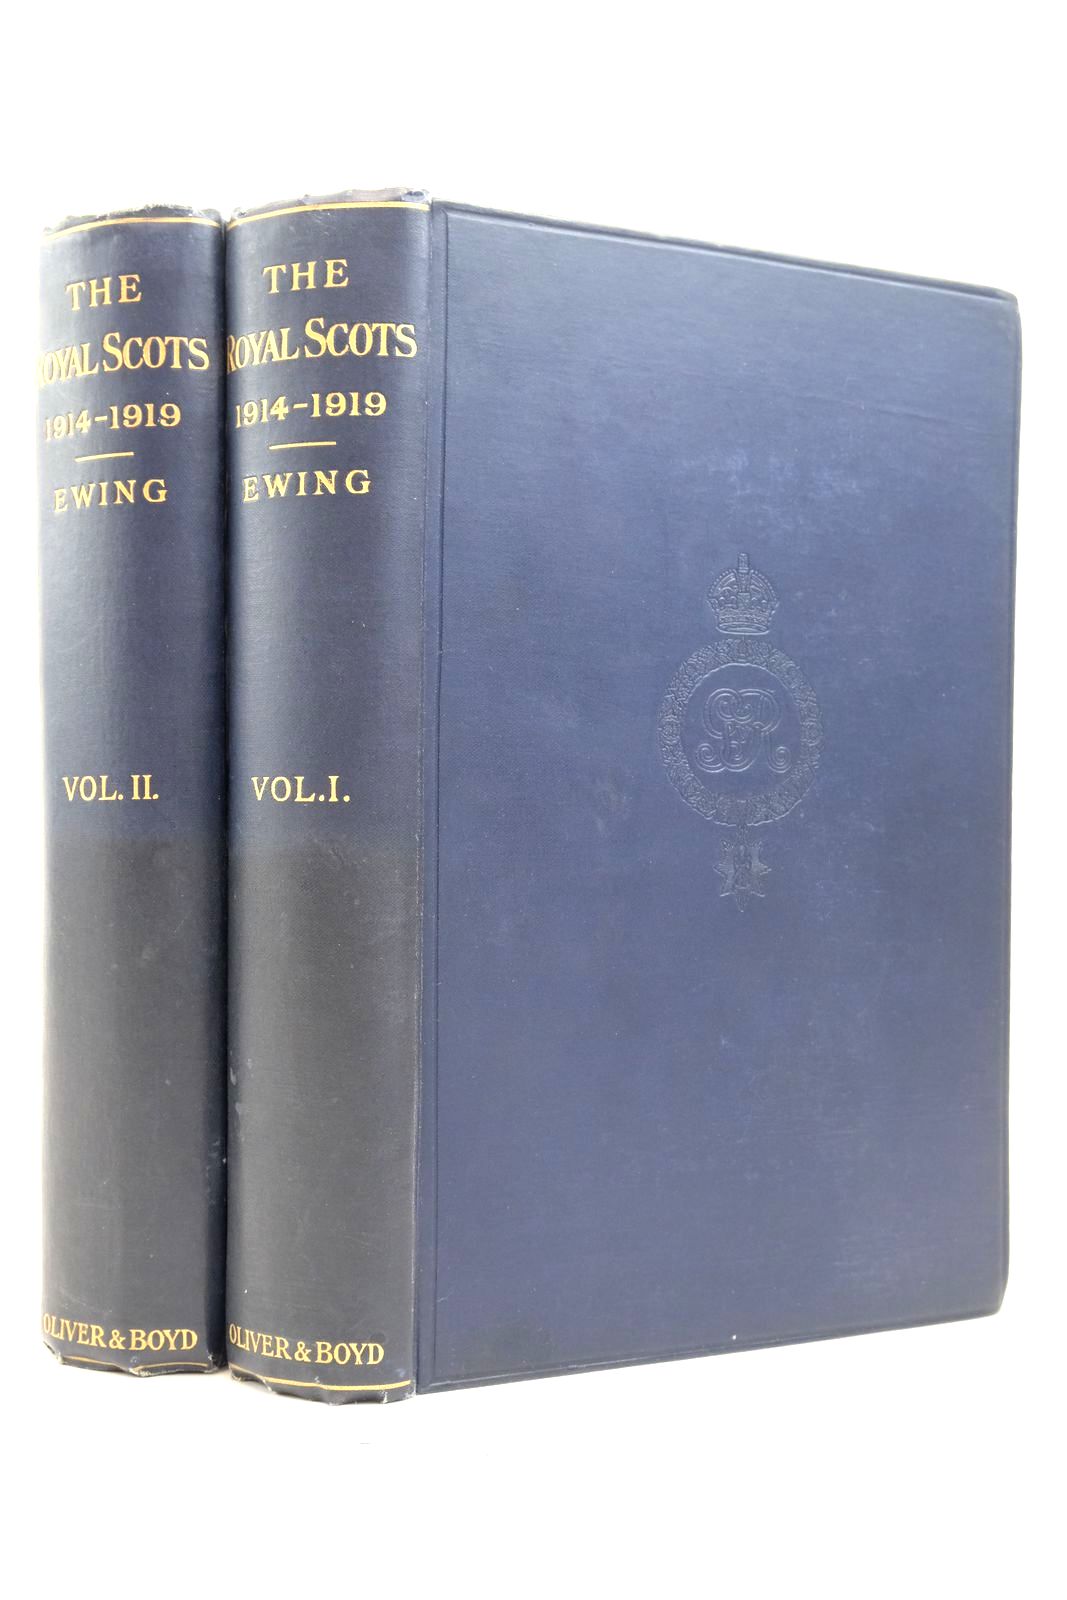 Photo of THE ROYAL SCOTS 1914-1919 (2 VOLUMES)- Stock Number: 2137551